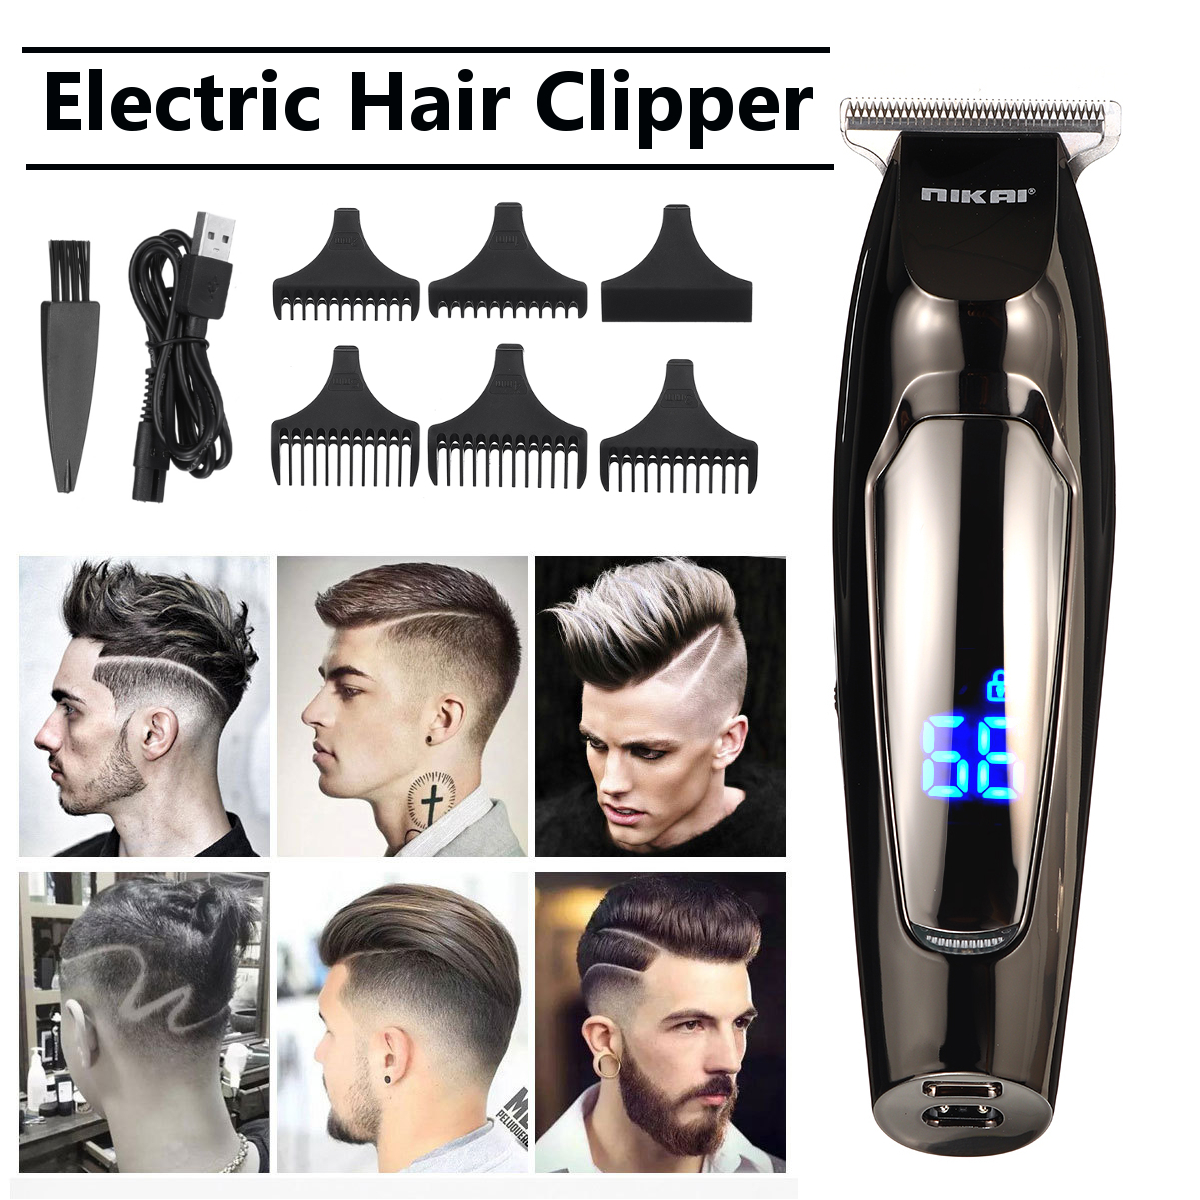 trimming carving hair clipper